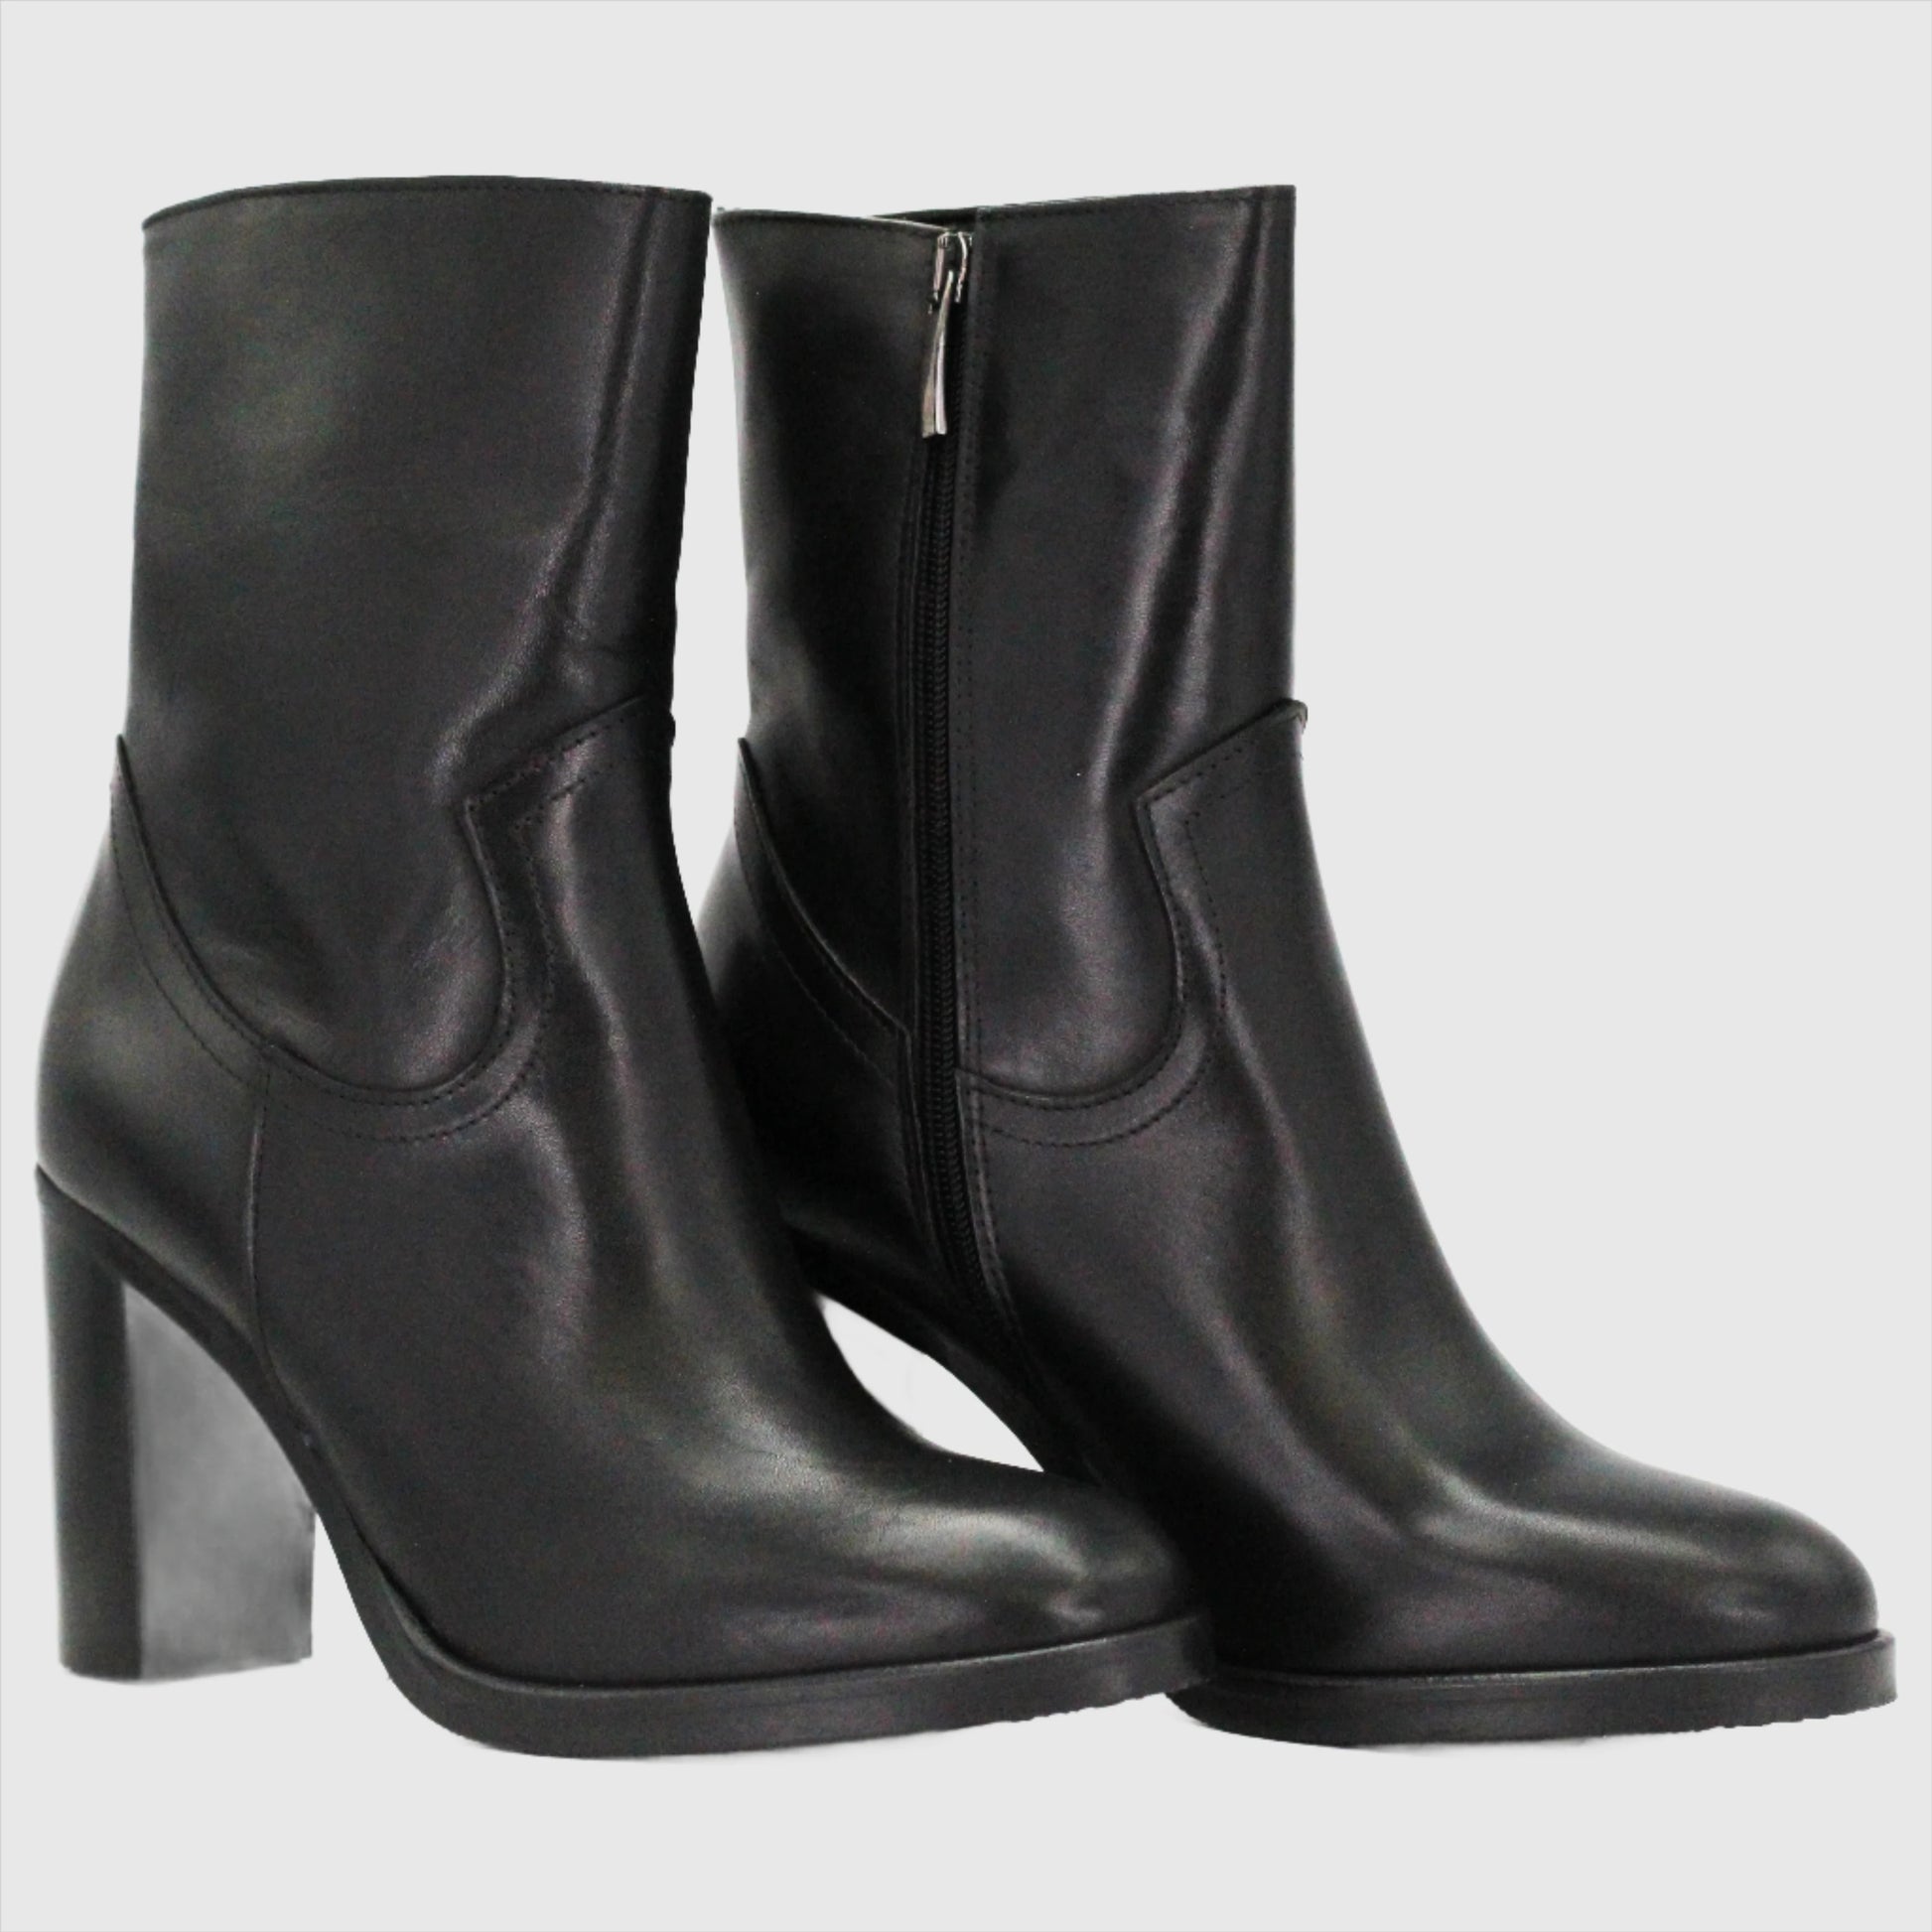 Shop Handmade Italian Leather heeled boot in nero (GC8553) or browse our range of hand-made Italian shoes in leather or suede in-store at Aliverti Cape Town, or shop online. We deliver in South Africa & offer multiple payment plans as well as accept multiple safe & secure payment methods.